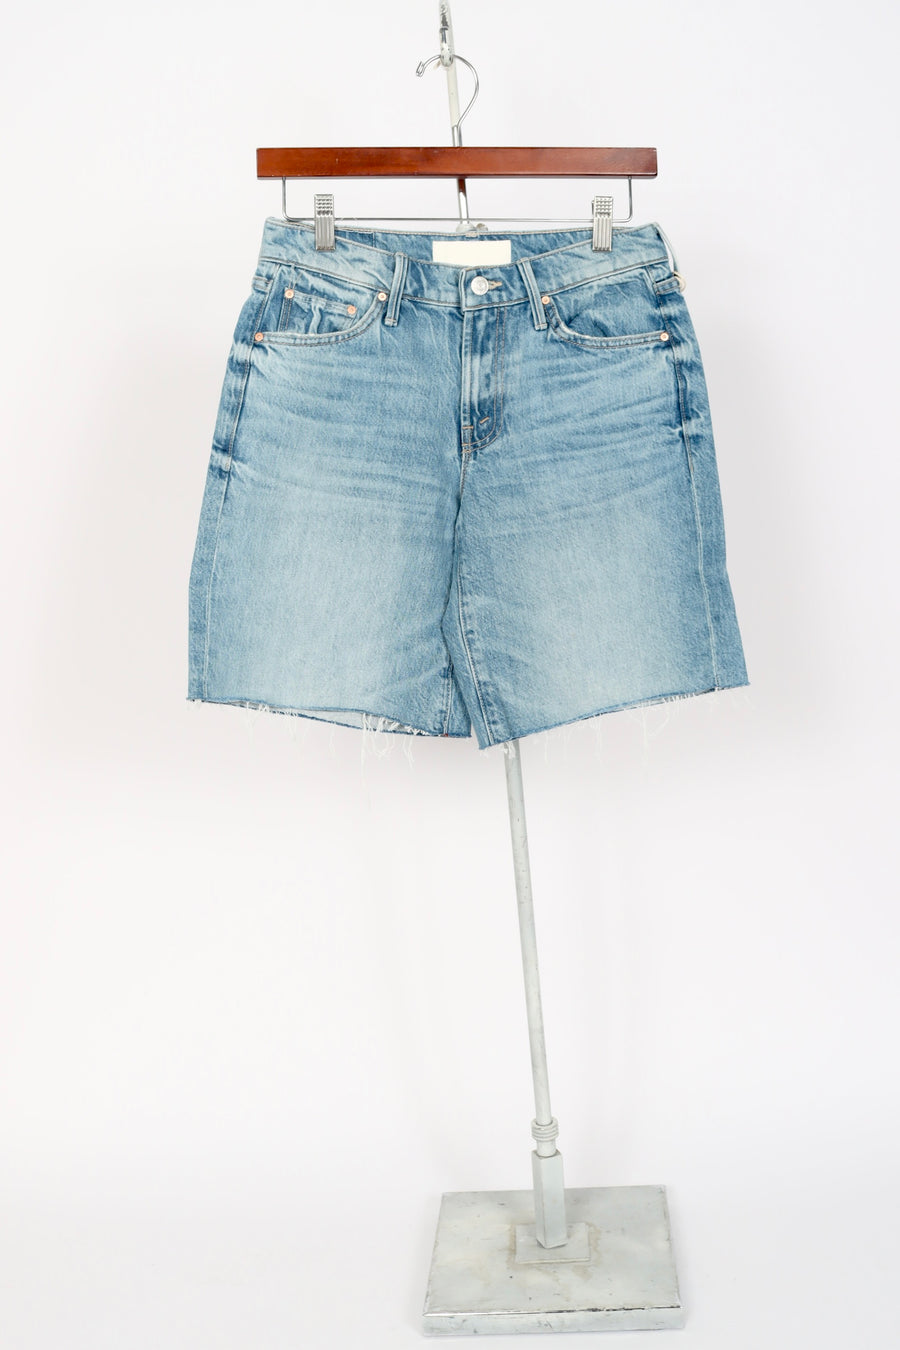 The Down Low Undercover Short Fray - Material Girl